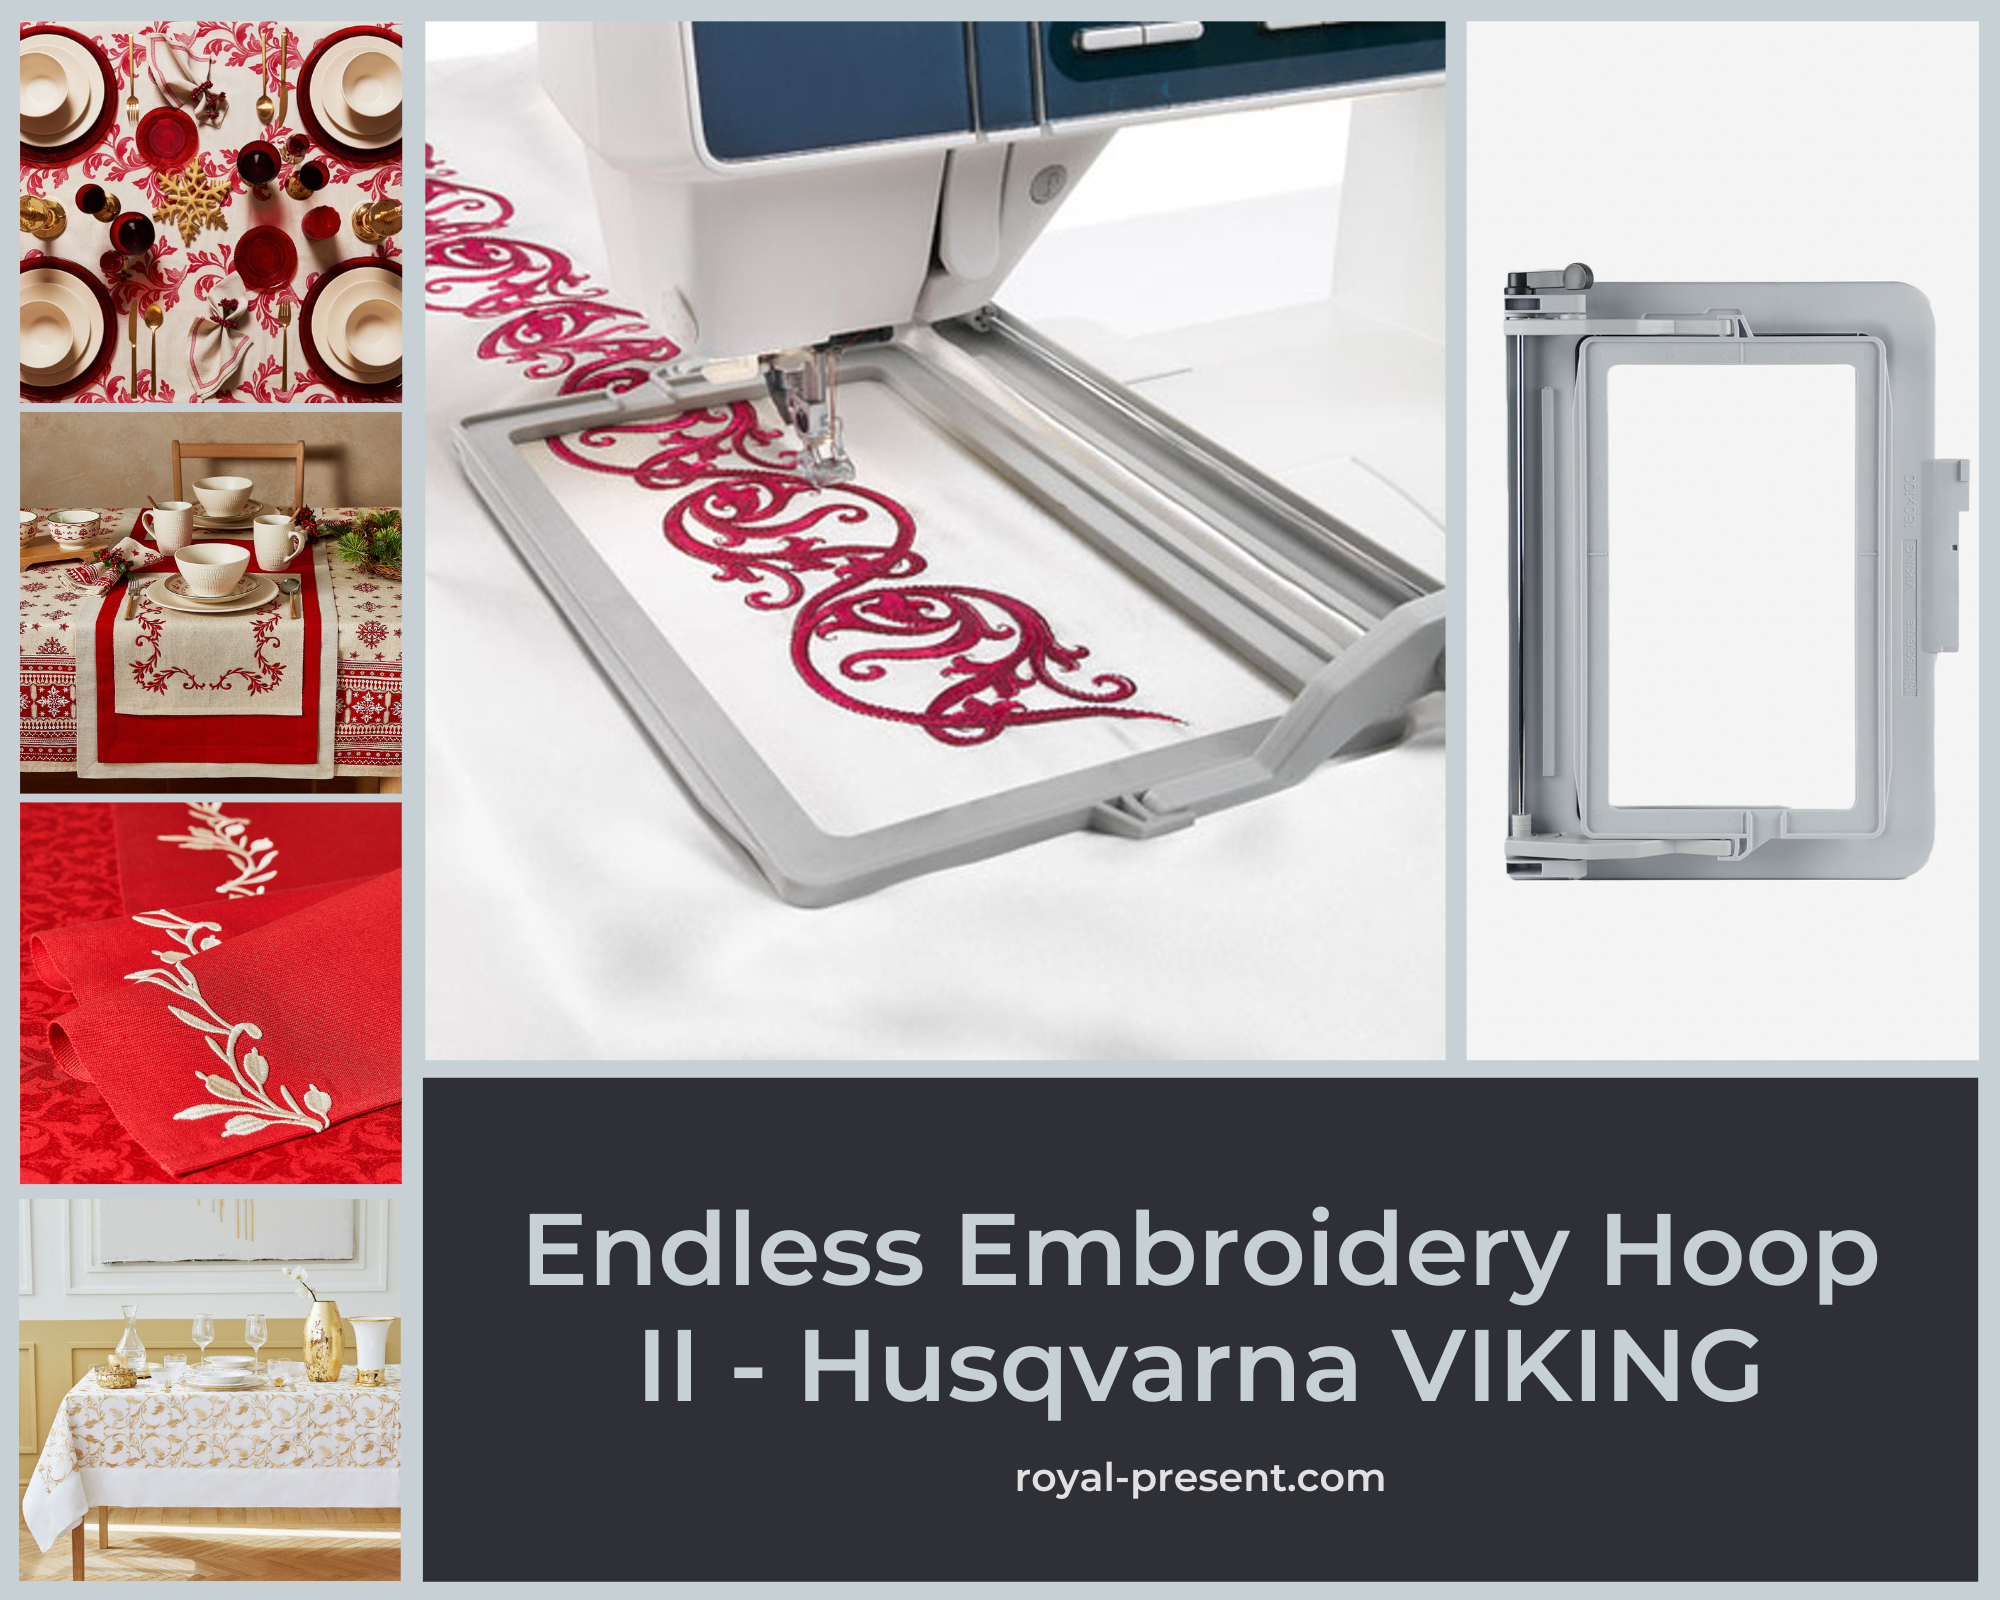 The Endless Embroidery Hoop: Your Gateway to Breathtaking Border Embroidery